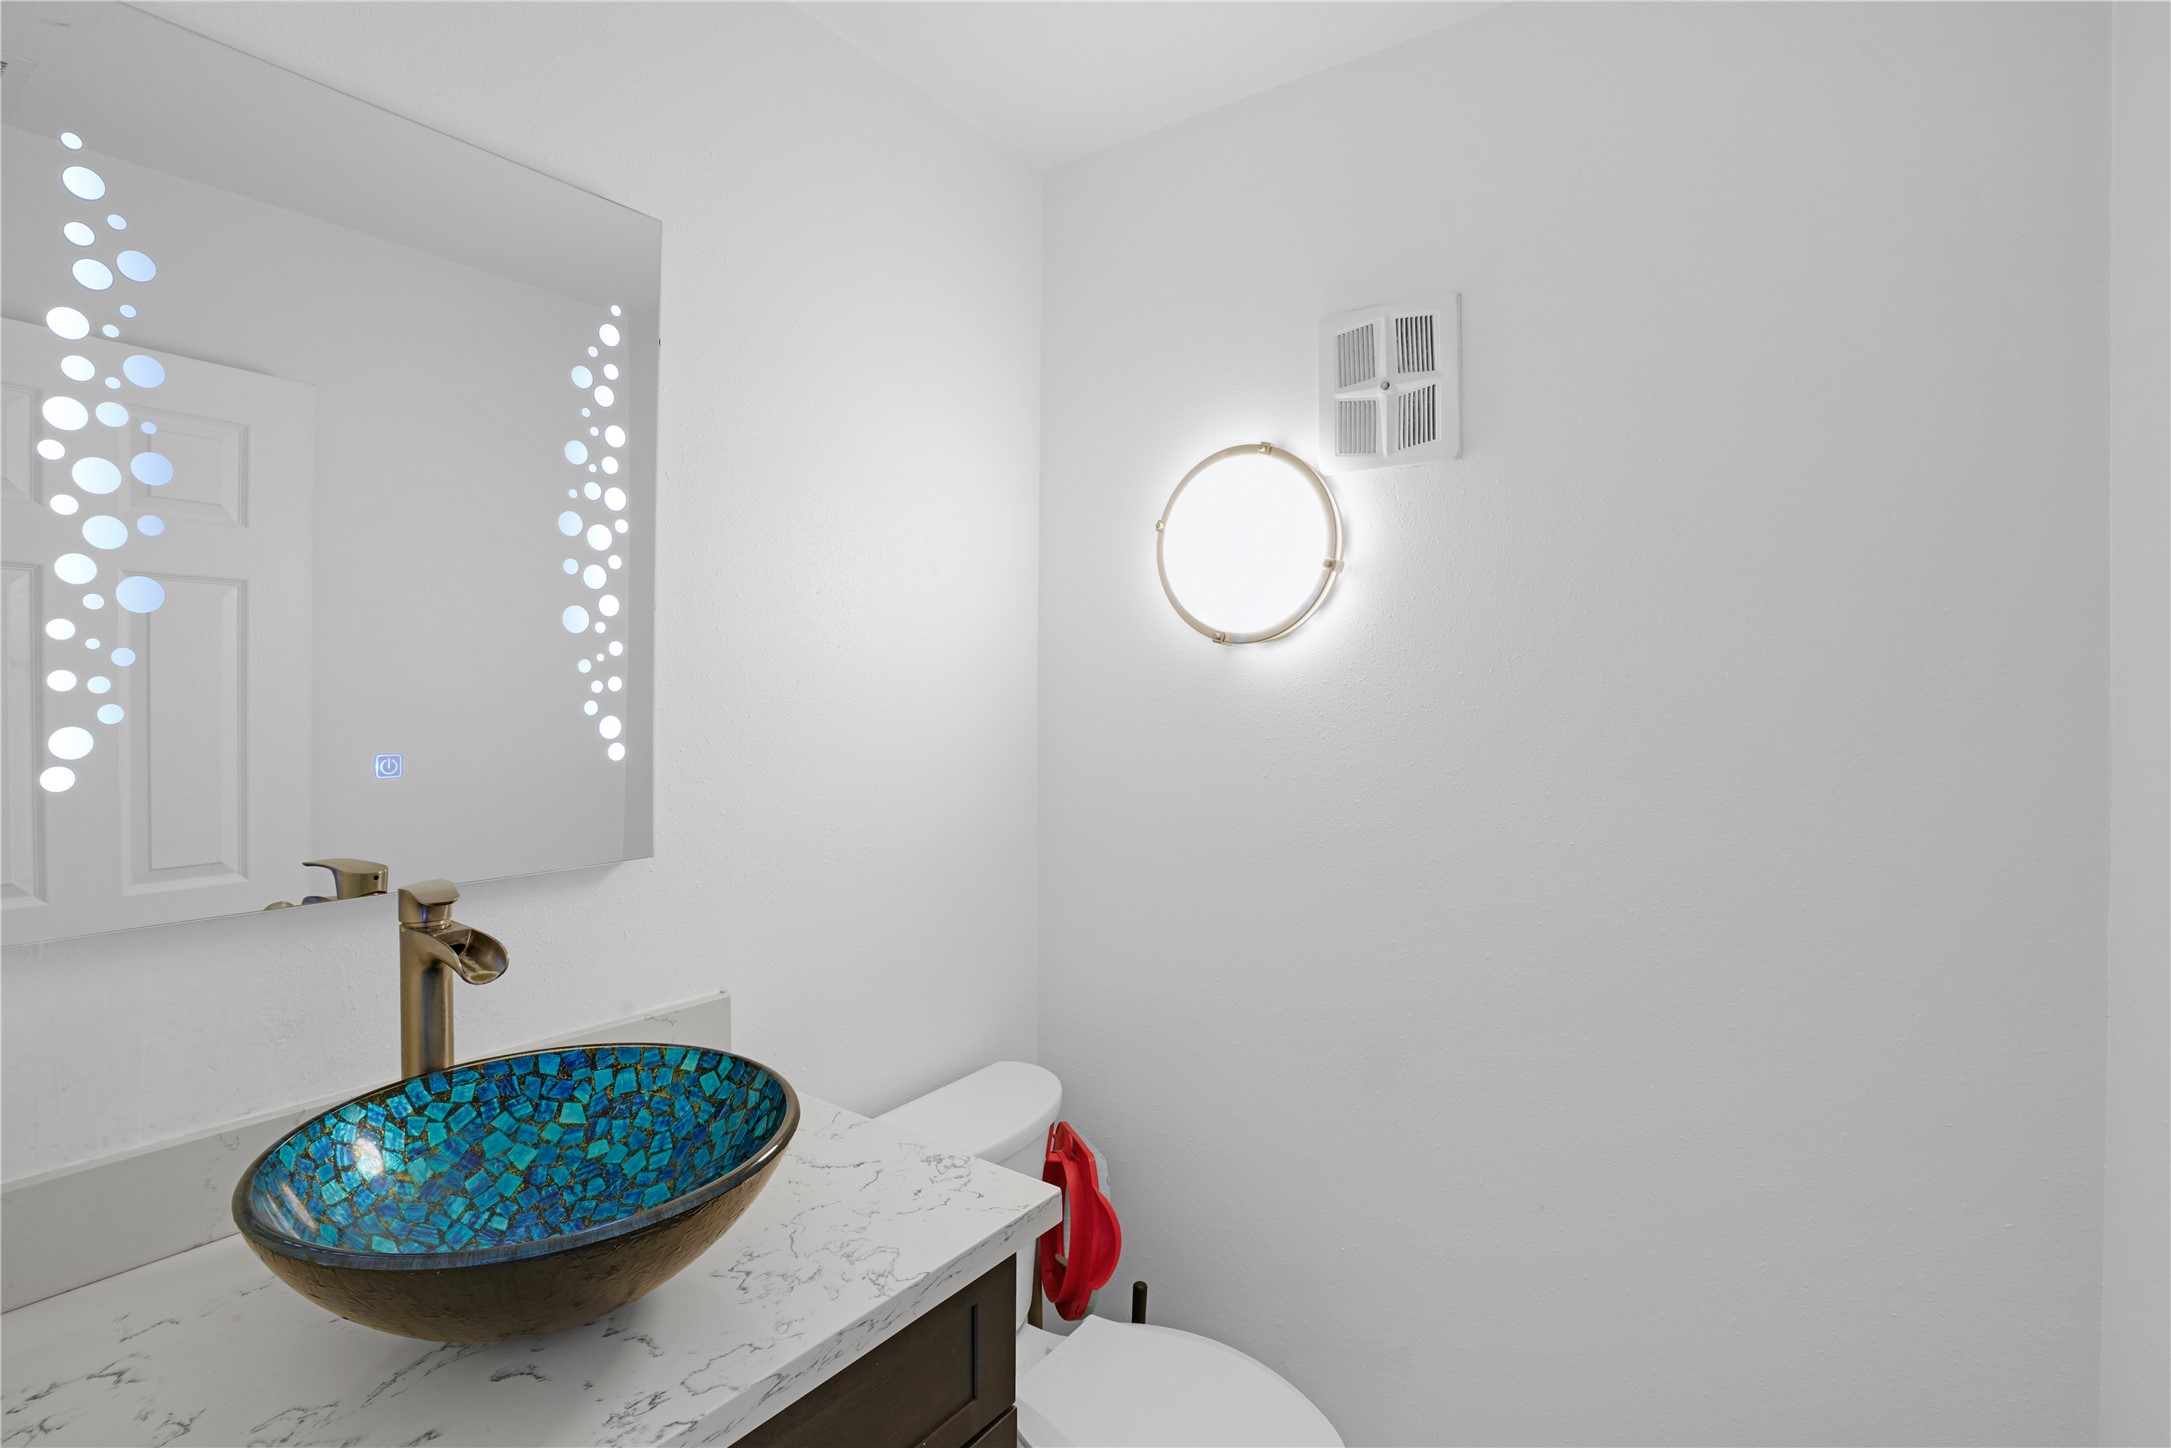 Half bath off the entry with smart mirror and vessel sink.